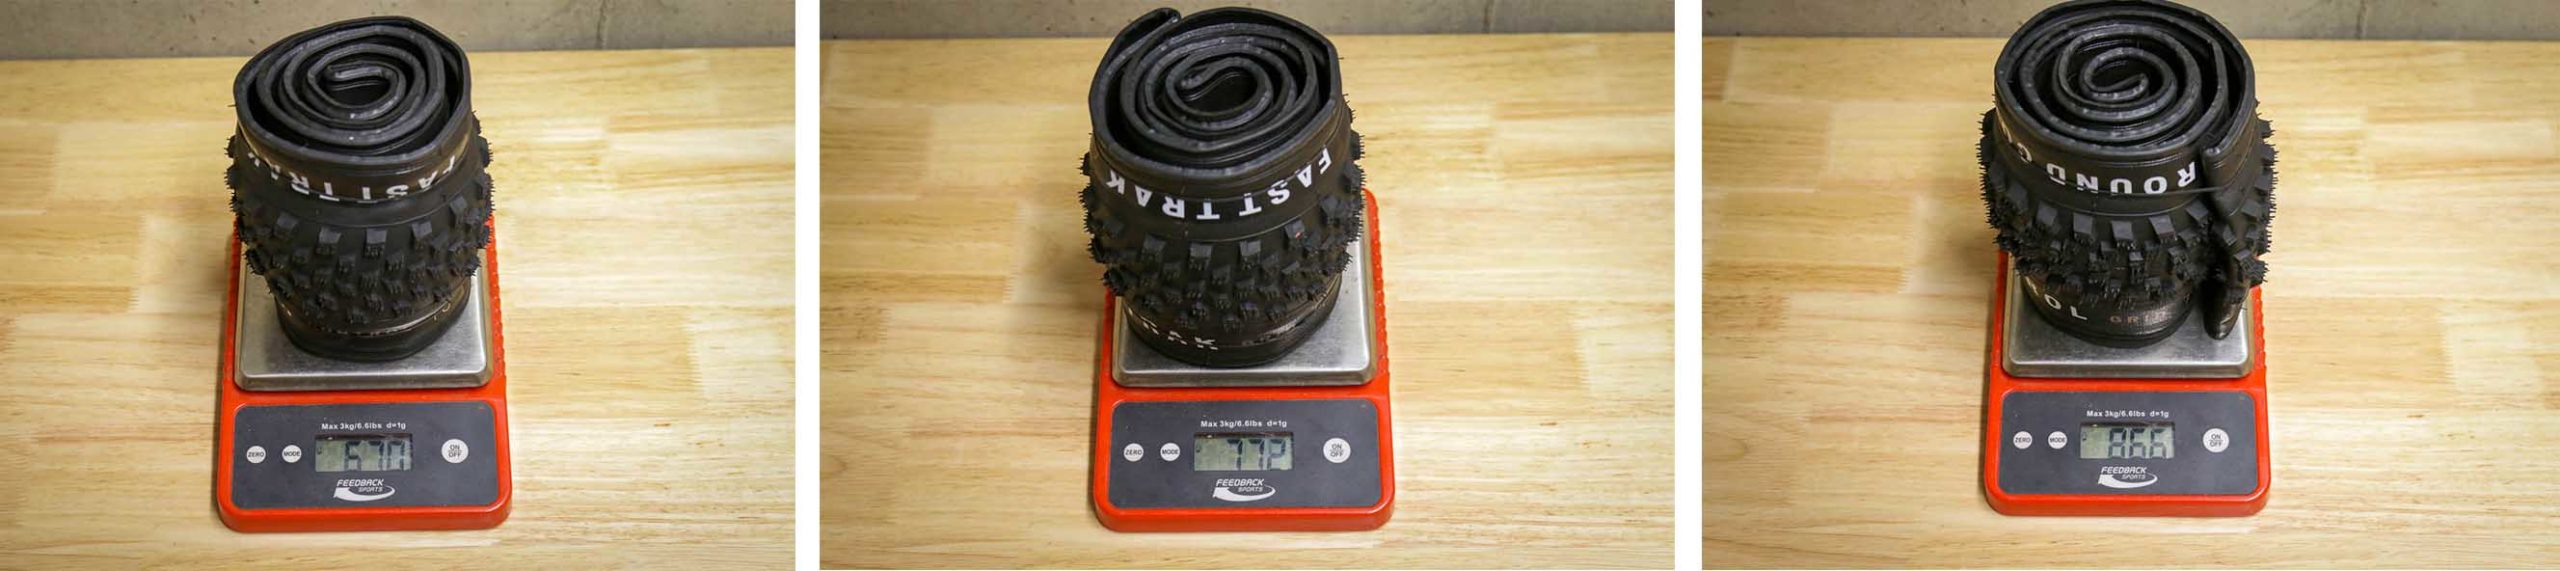 Specialized XC tire actual weight